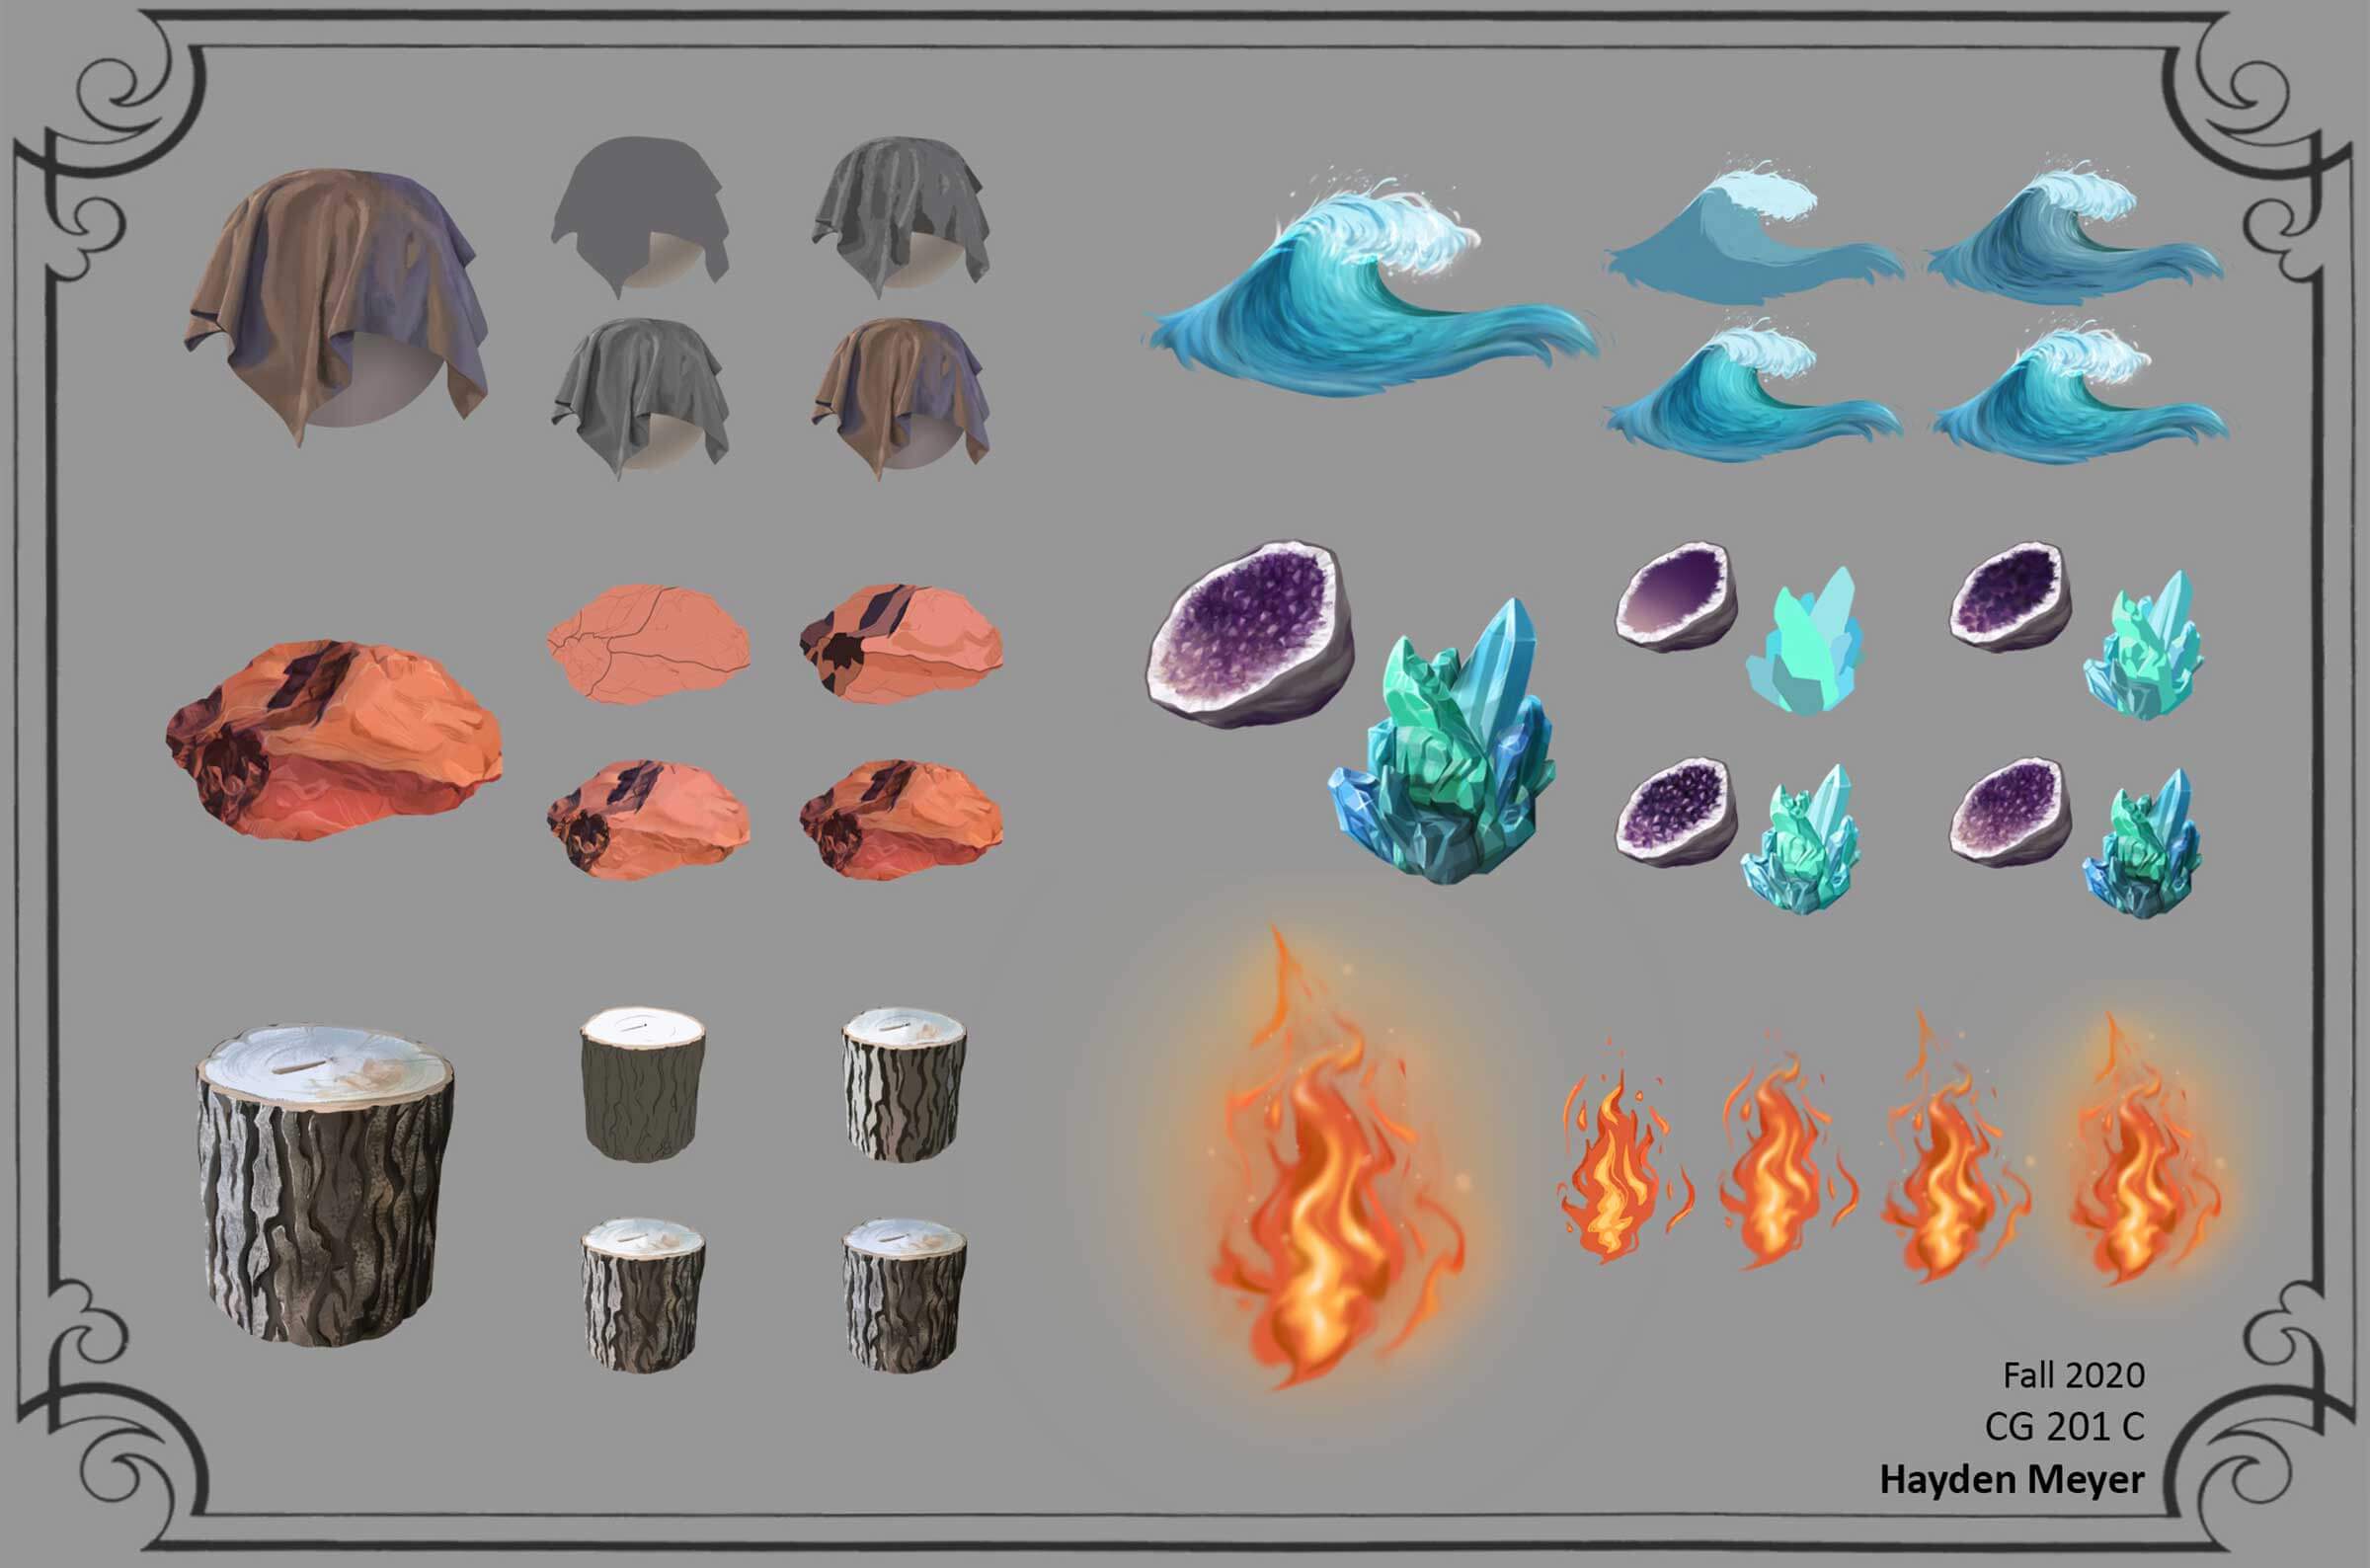 Concept artwork of various objects and elements like water and fire.